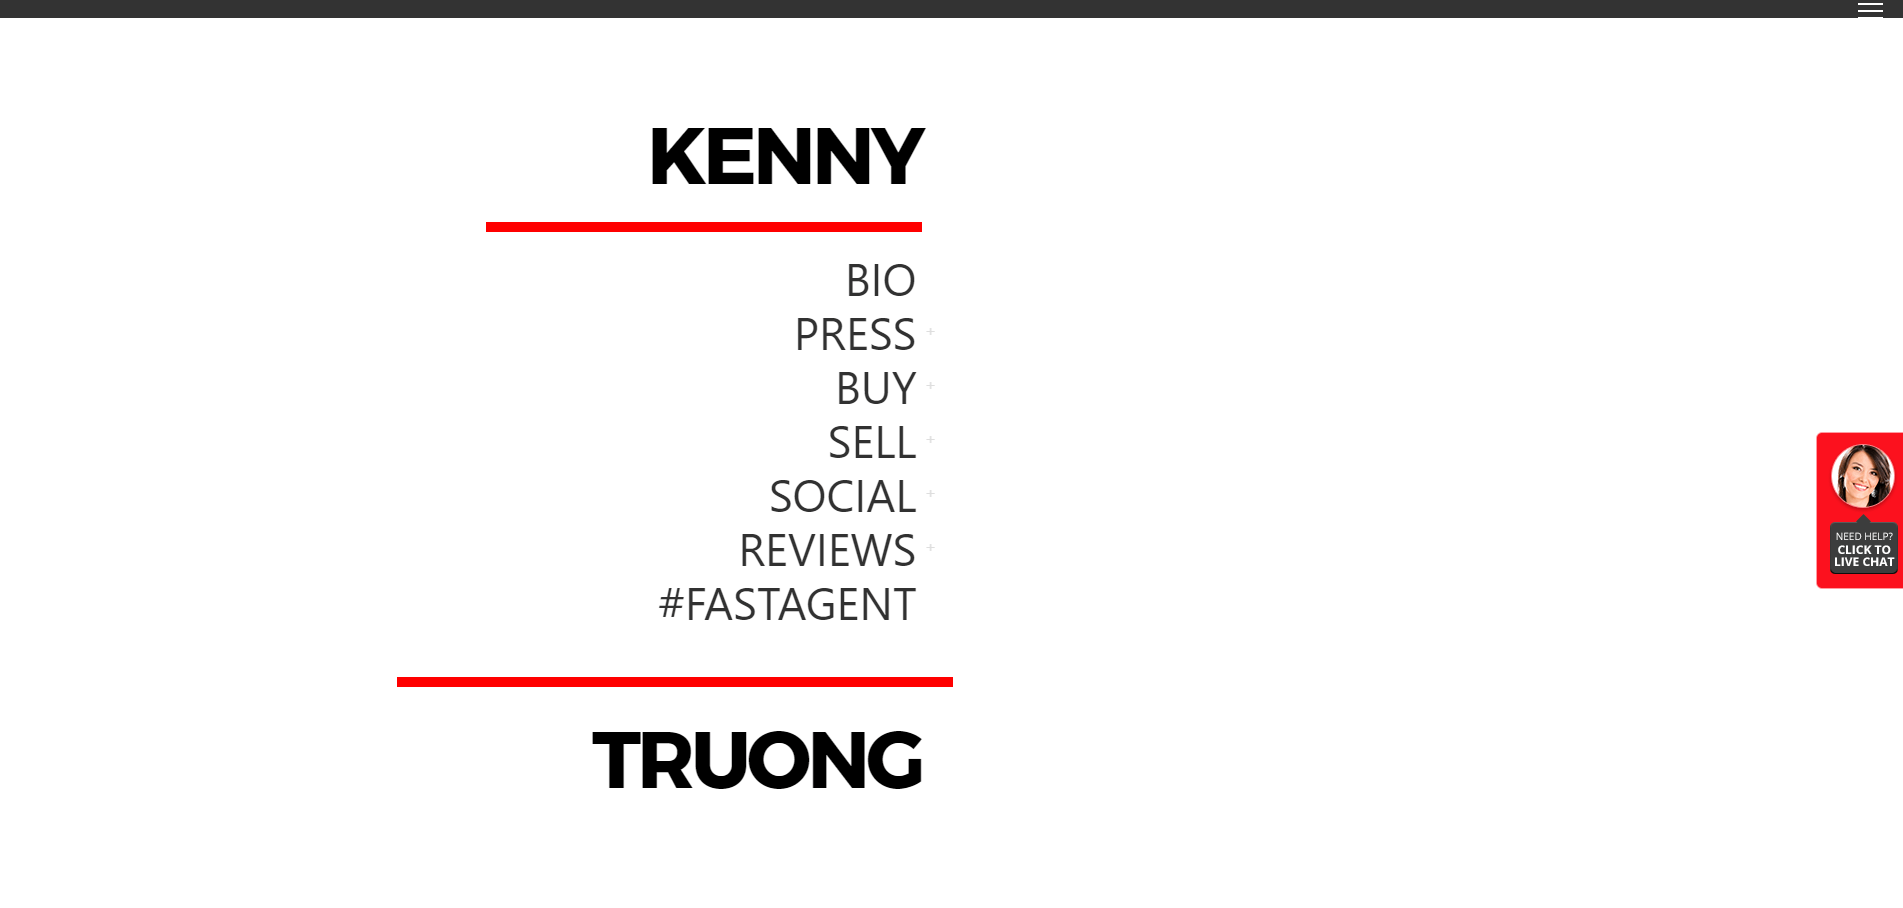  Awesome!  This list has 101 of the best real estate websites.  We reviewed and ranked each site, 1-101.  Here's kennytruong.com.  Curious who made the cut? 